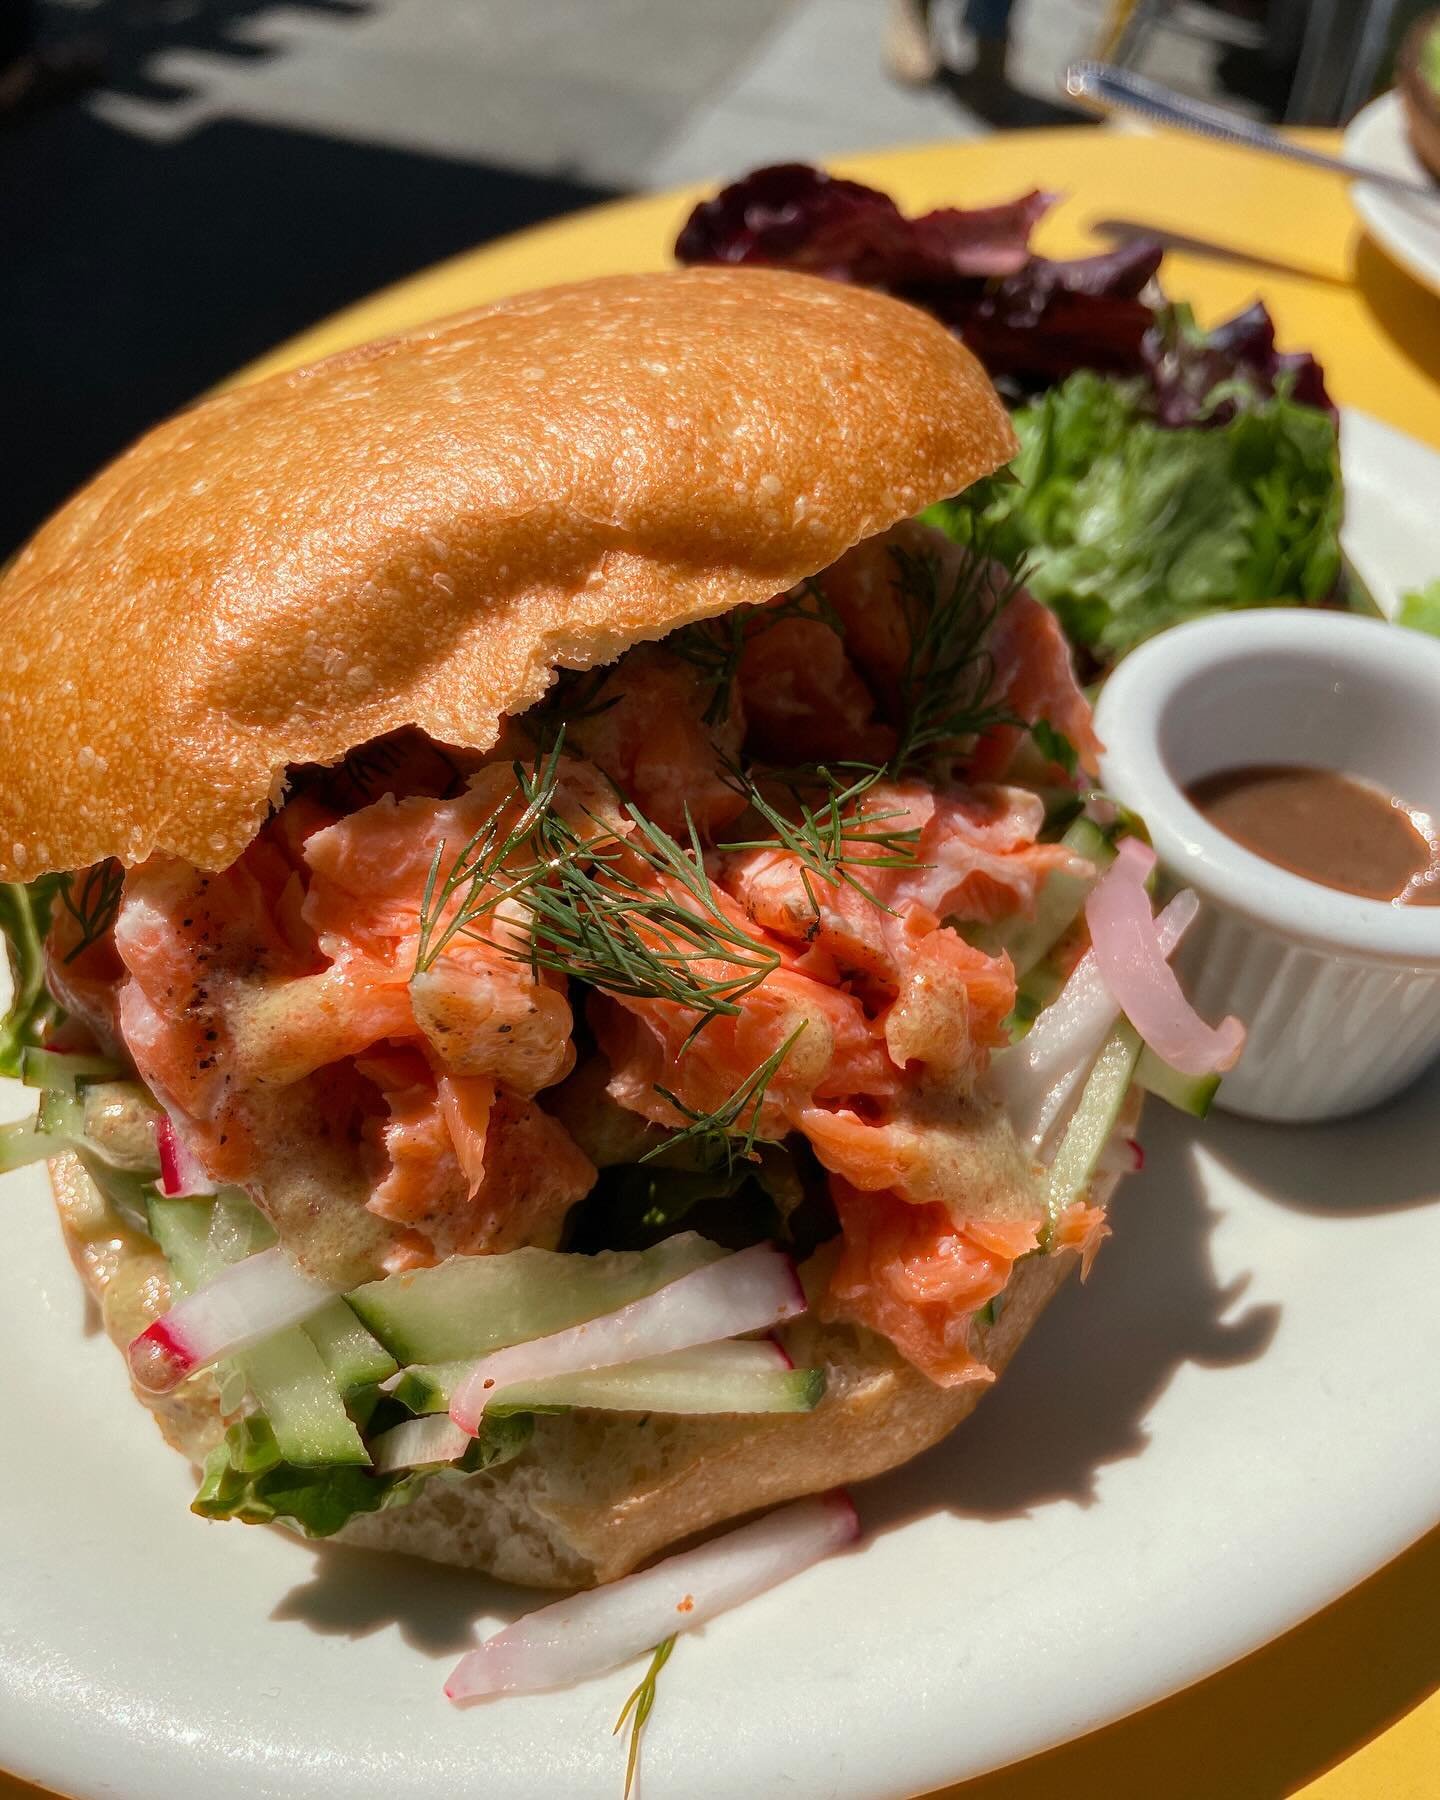 Special sandwich alert!
We call it the Royal Sandwich.  It&rsquo;s amazing!  Poached King salmon with cucumber, radish, dill, mayo and mustard vinaigrette on a toasted @acmebreadberkeley bun. You will feel so good after eating this.

#brainfood
#mont